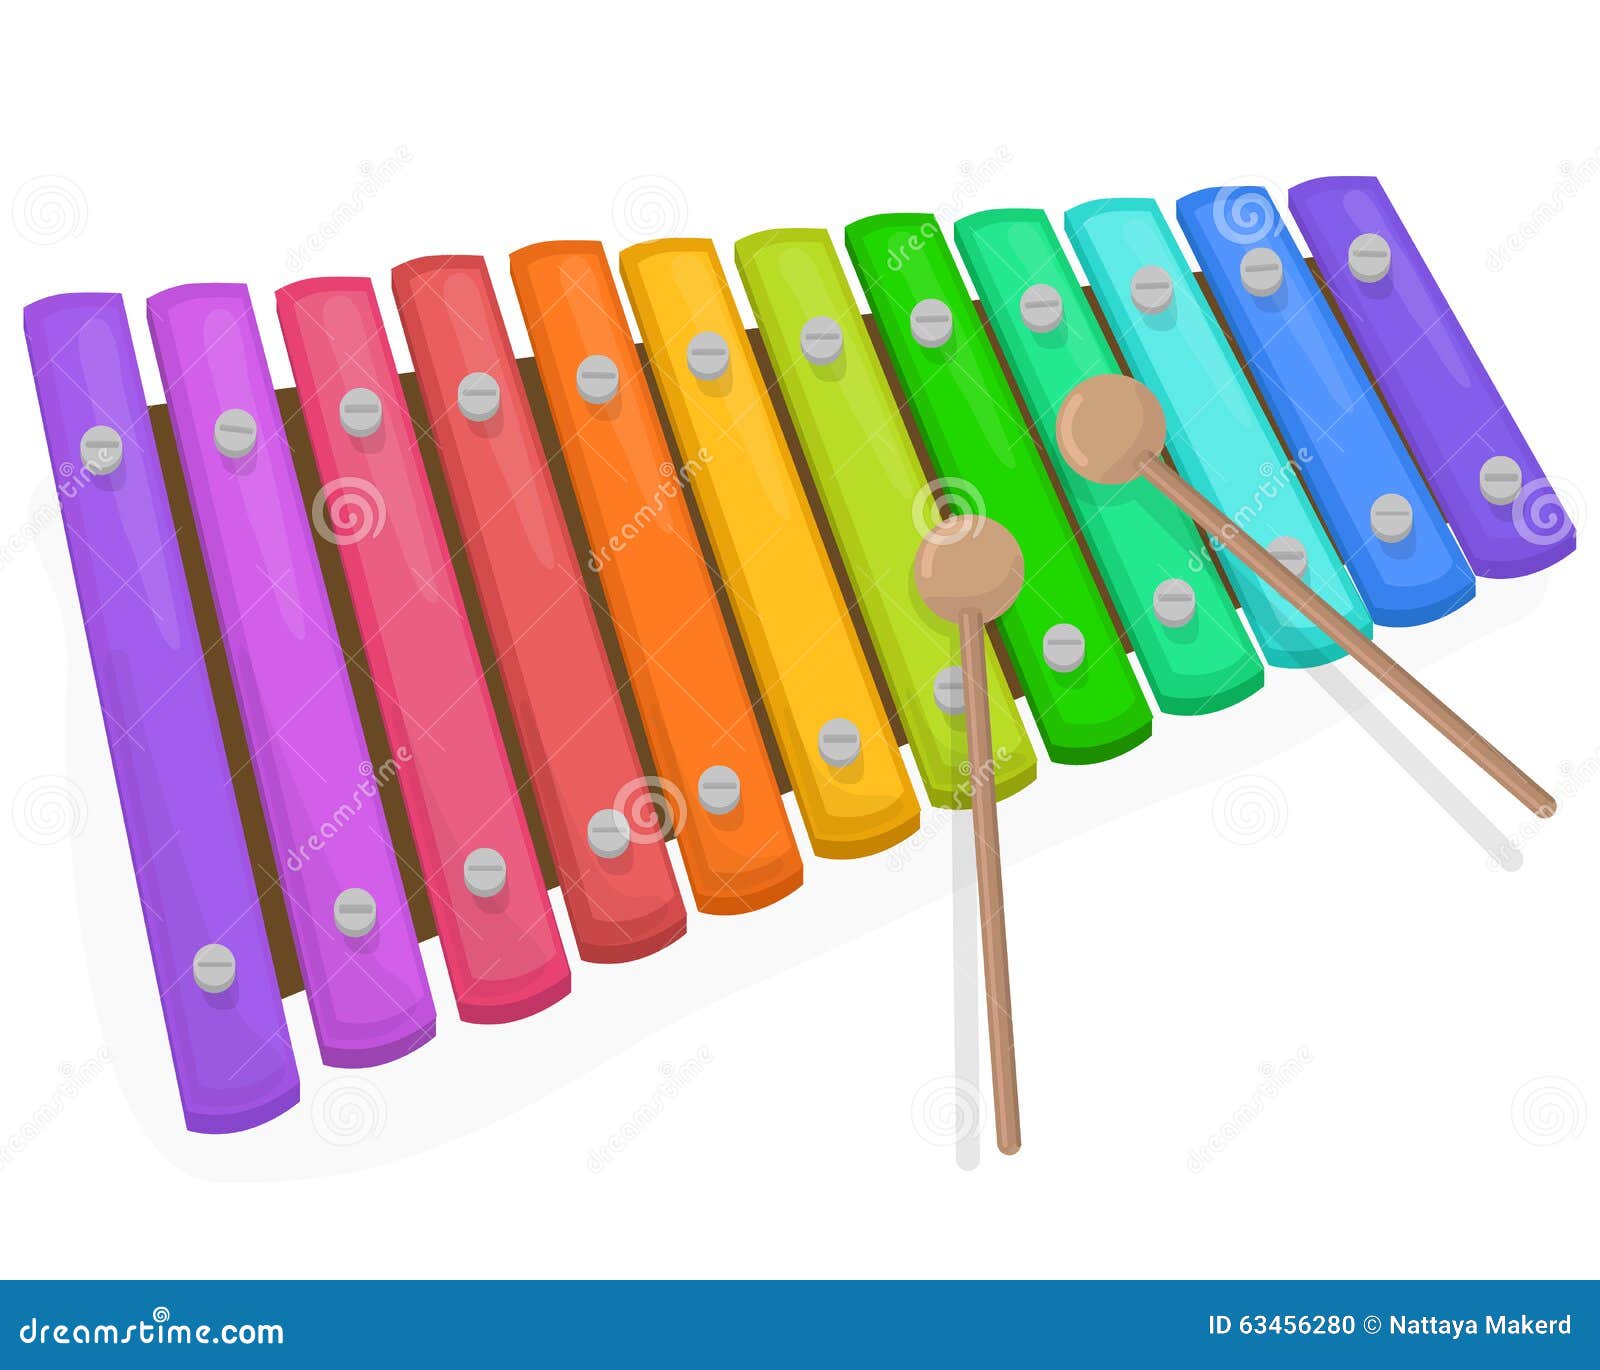 colorful xylophone with mallets on a white background